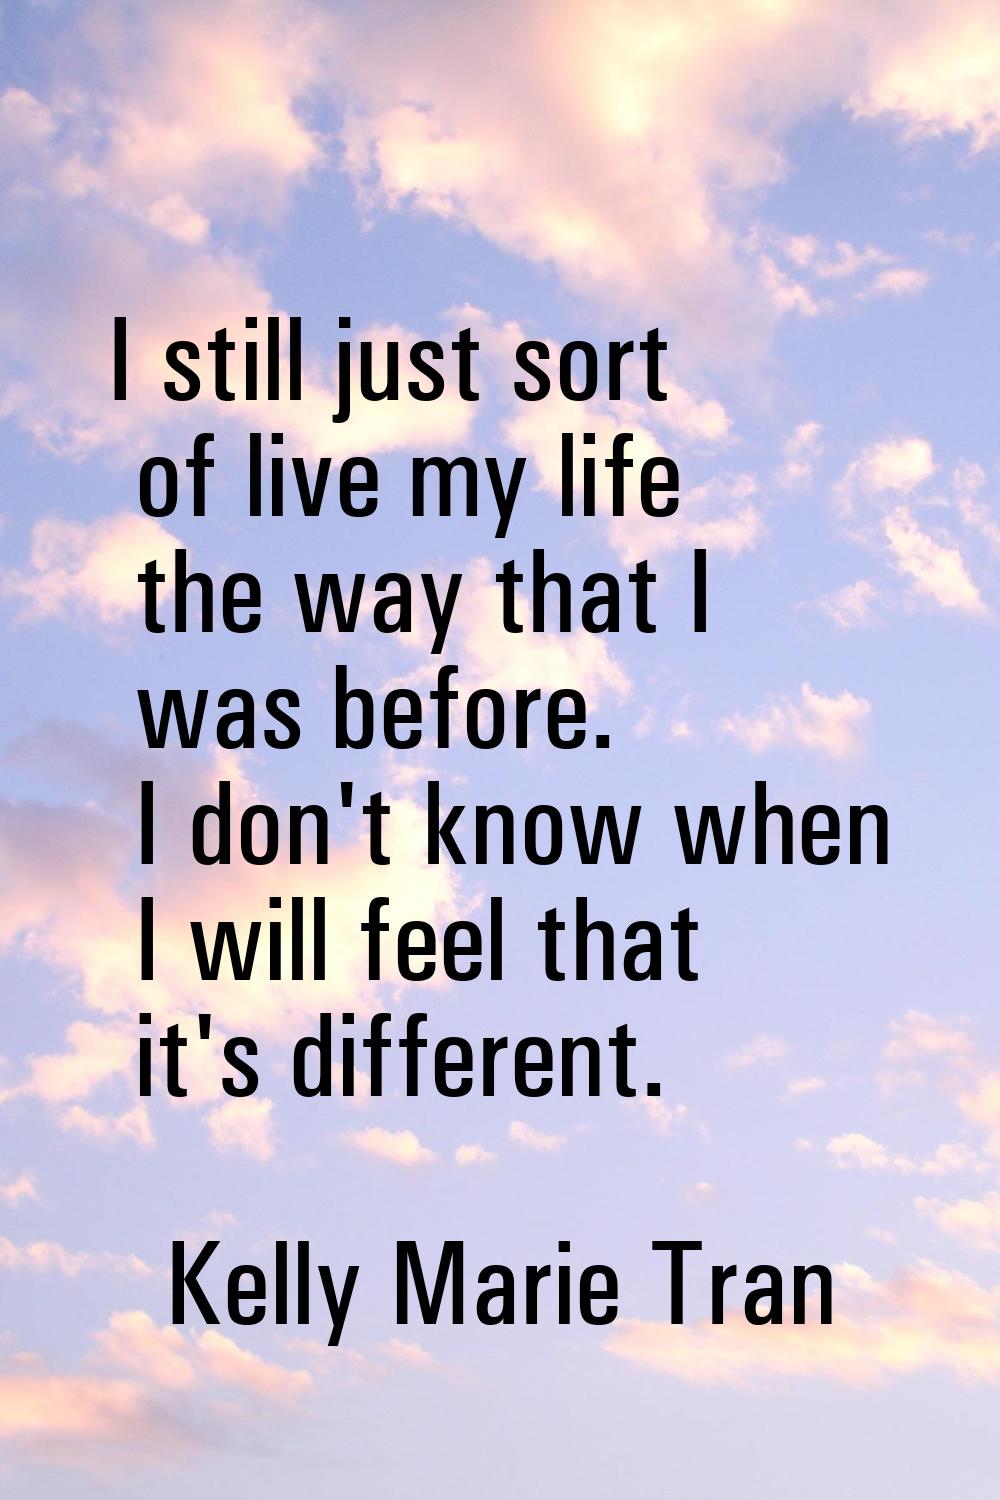 I still just sort of live my life the way that I was before. I don't know when I will feel that it'